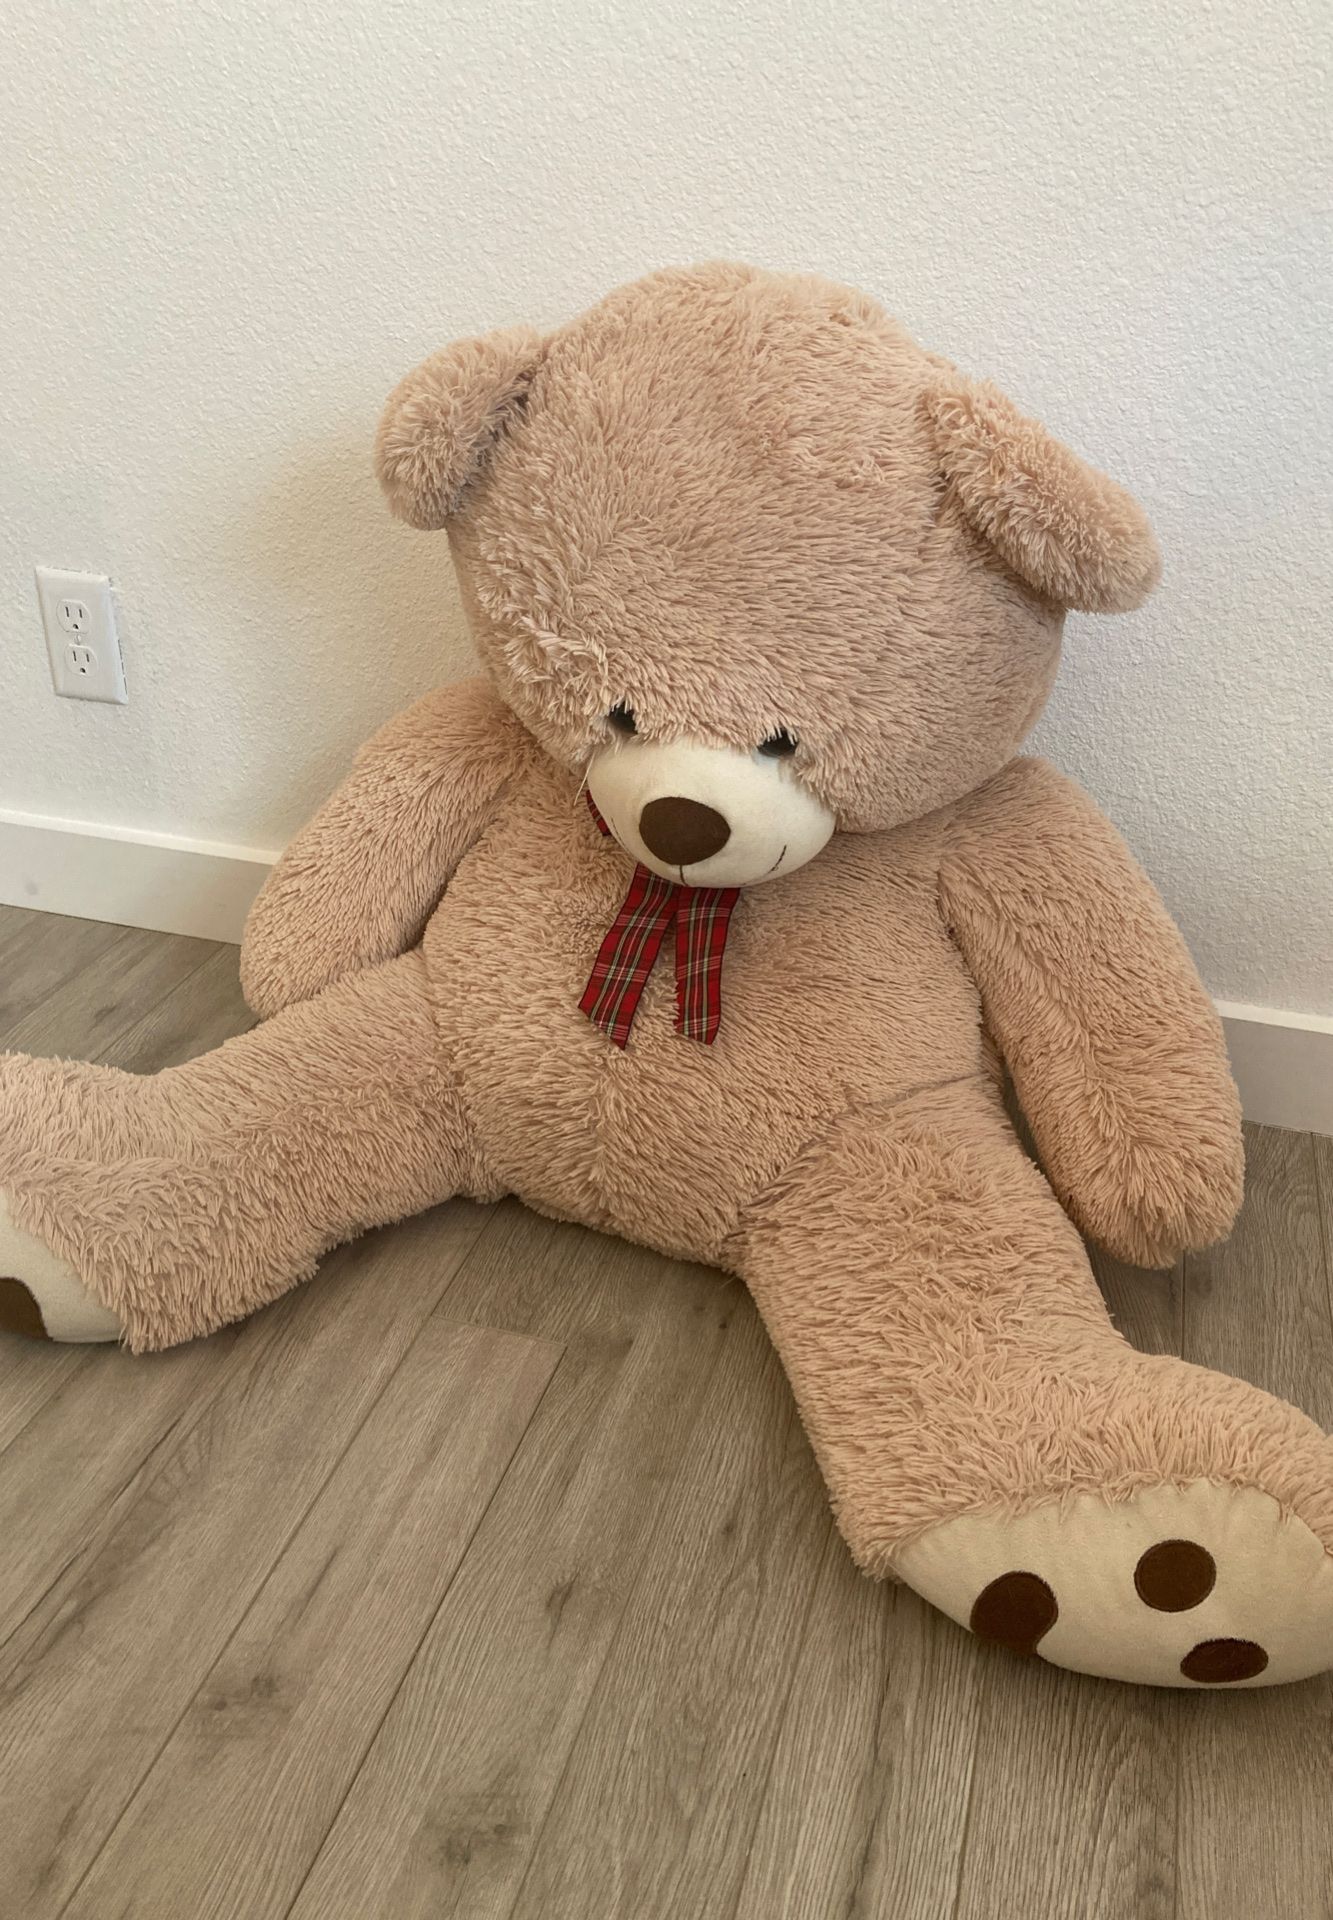 Large Teddy Bear in Need of New Home